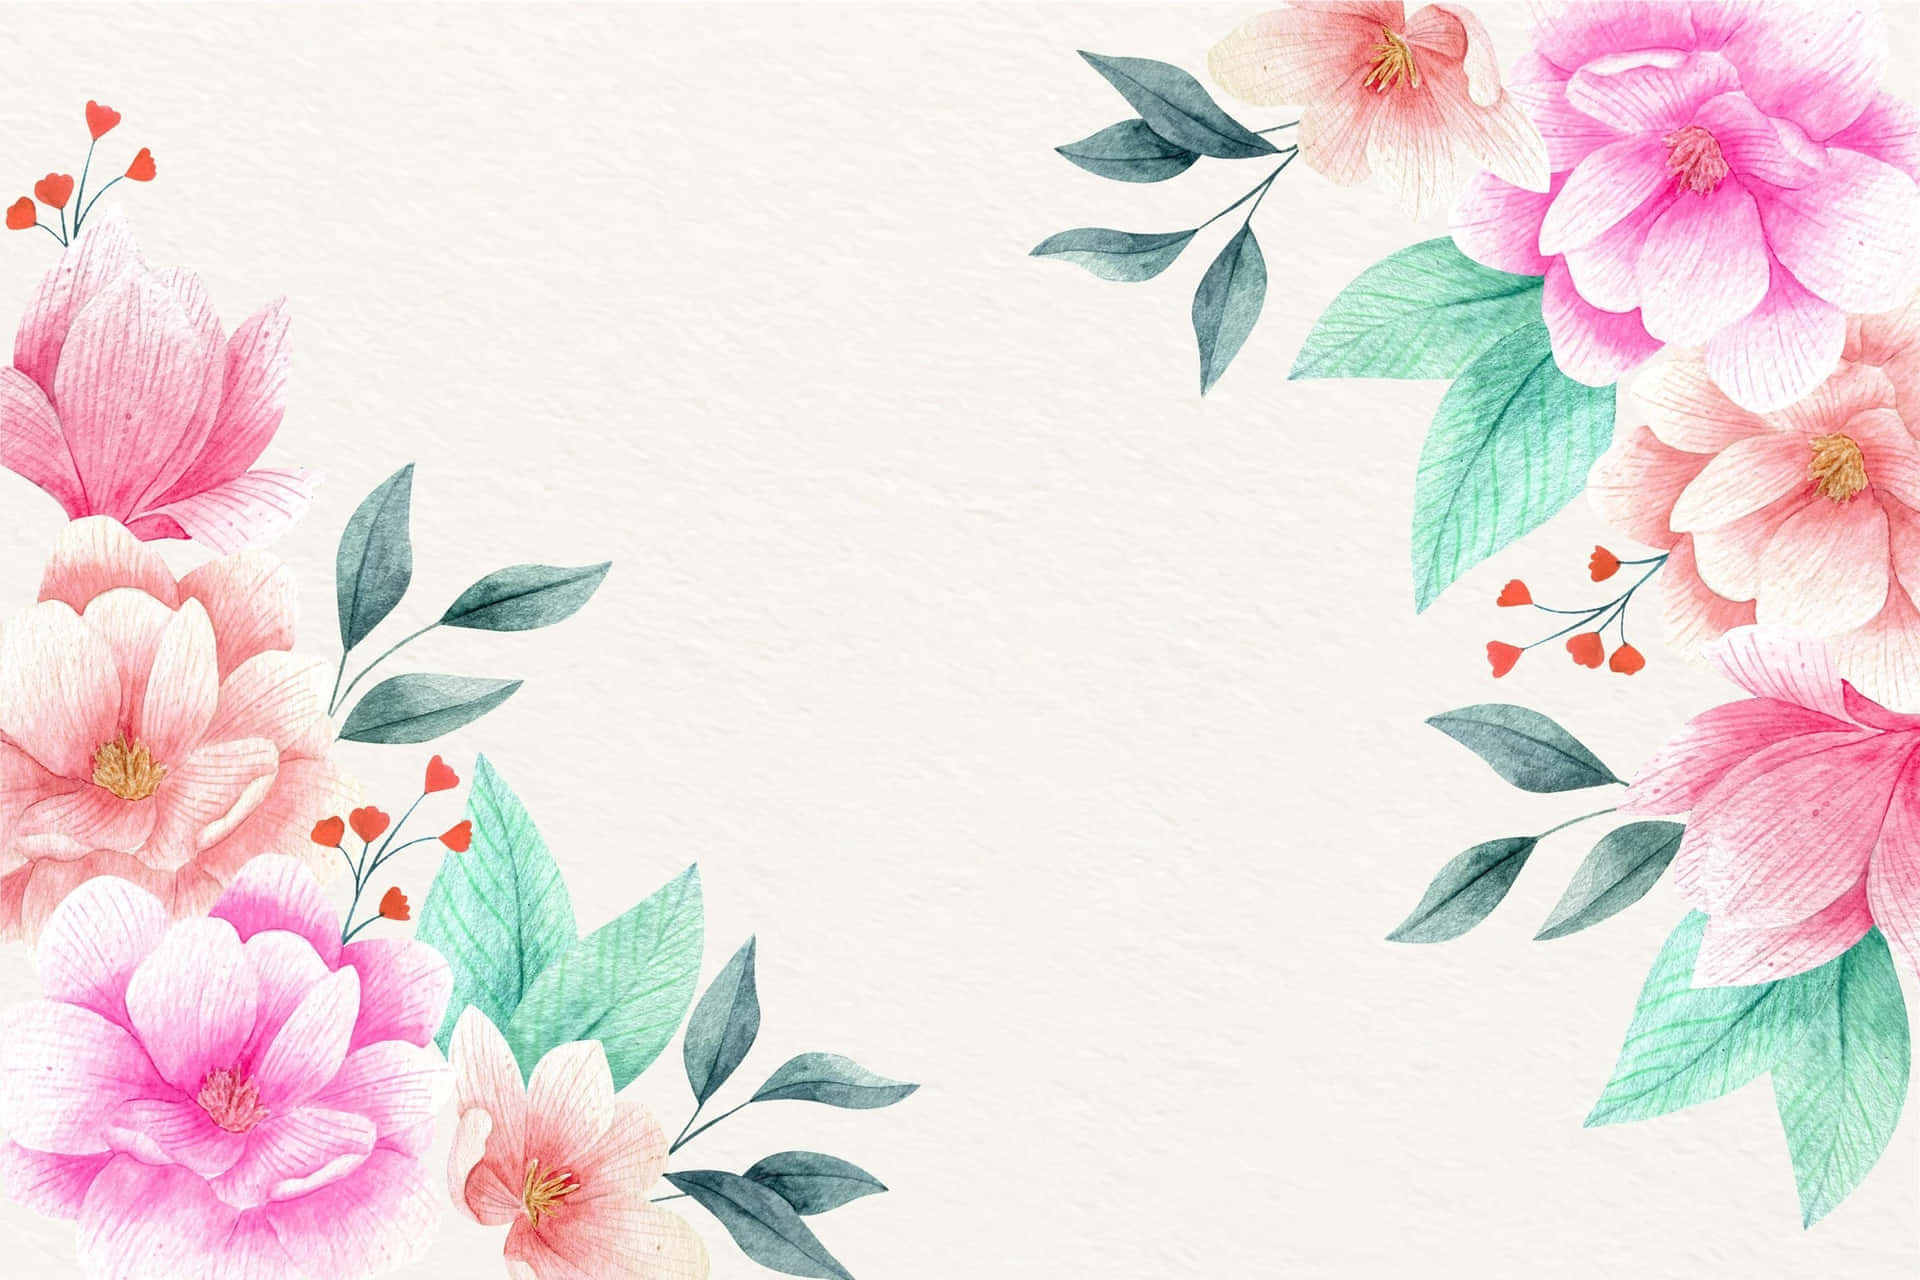 Brighten Your Day With A Watercolor Flower